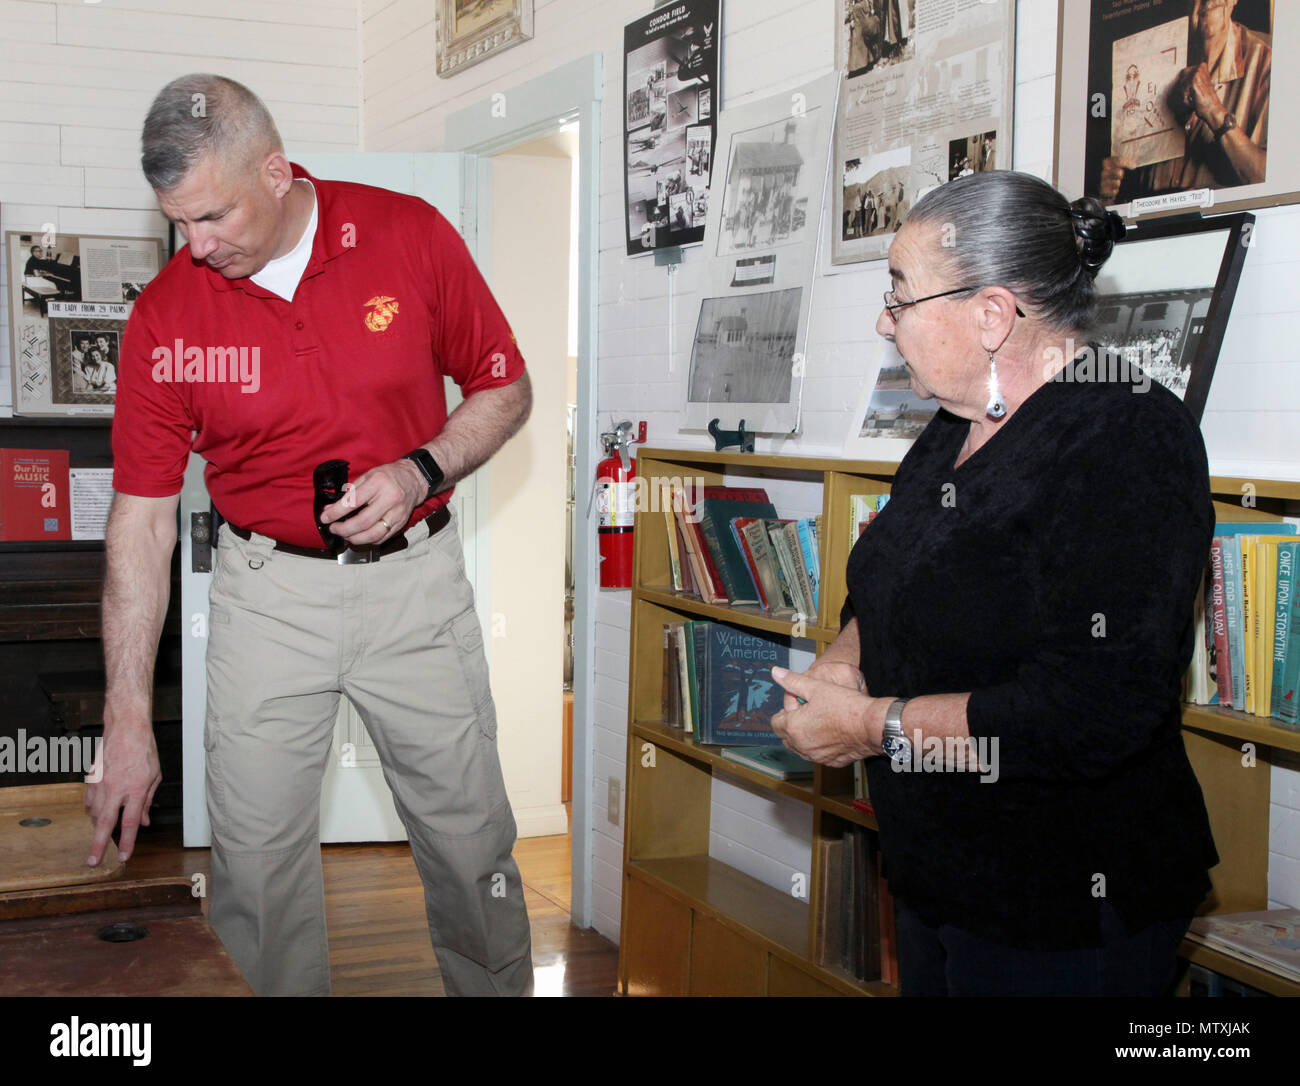 Brig. Gen. William F. Mullen III, Combat Center Commanding General, inspects a desk with Twentynine Palms Historical Society volunteer Pat Rimmington during a tour of the Old Schoolhouse Museum in Twentynine Palms, Calif., Jan. 31, 2017. Mullen and his wife, Vicki, toured the facility with Sgt. Maj. Michael J. Hendges, Combat Center Major; Cpl. Ben Mills, driver; Jim Ricker, Assistant Chief of Staff for Government and External Affairs; and Kristina Becker, Combat Center External Affairs Director. (Official Marine Corps photo by Kelly O'Sullivan/Released) Stock Photo